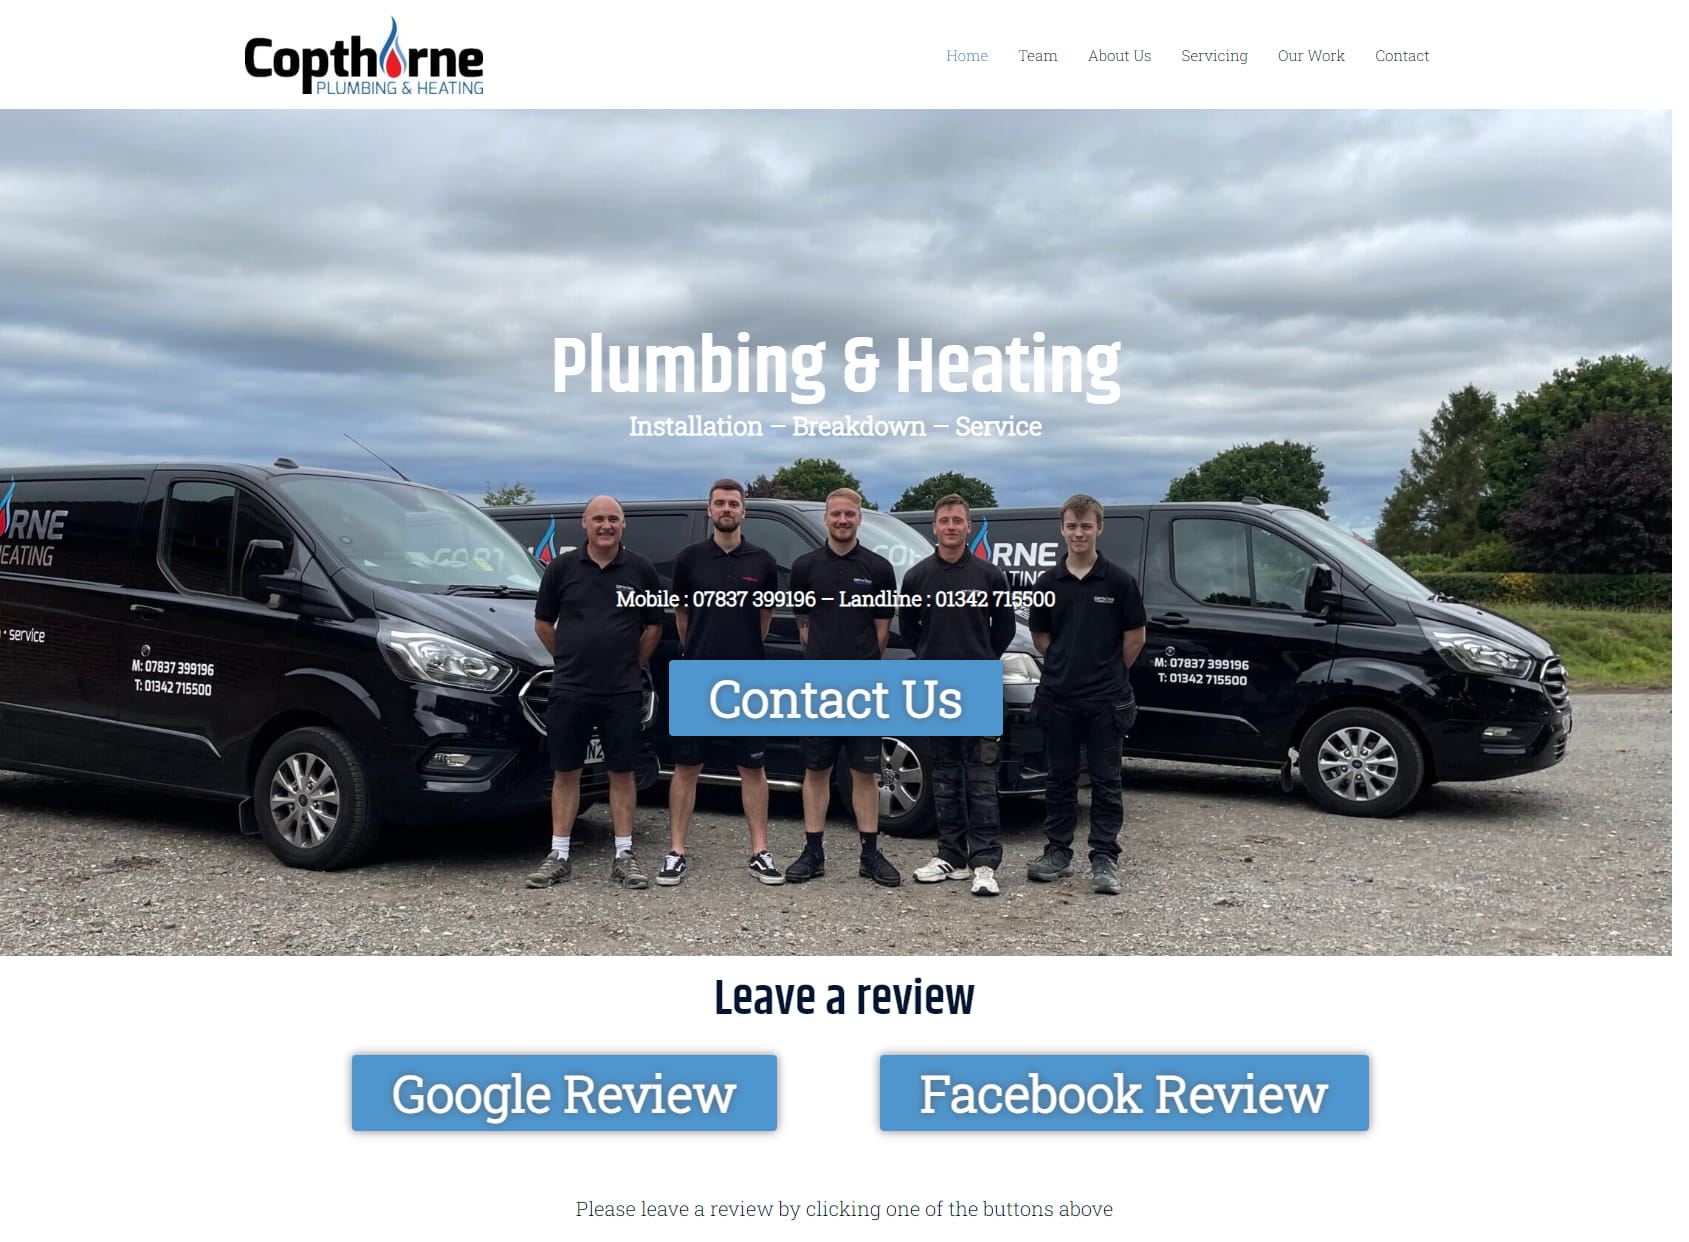 Copthorne Plumbing and Heating